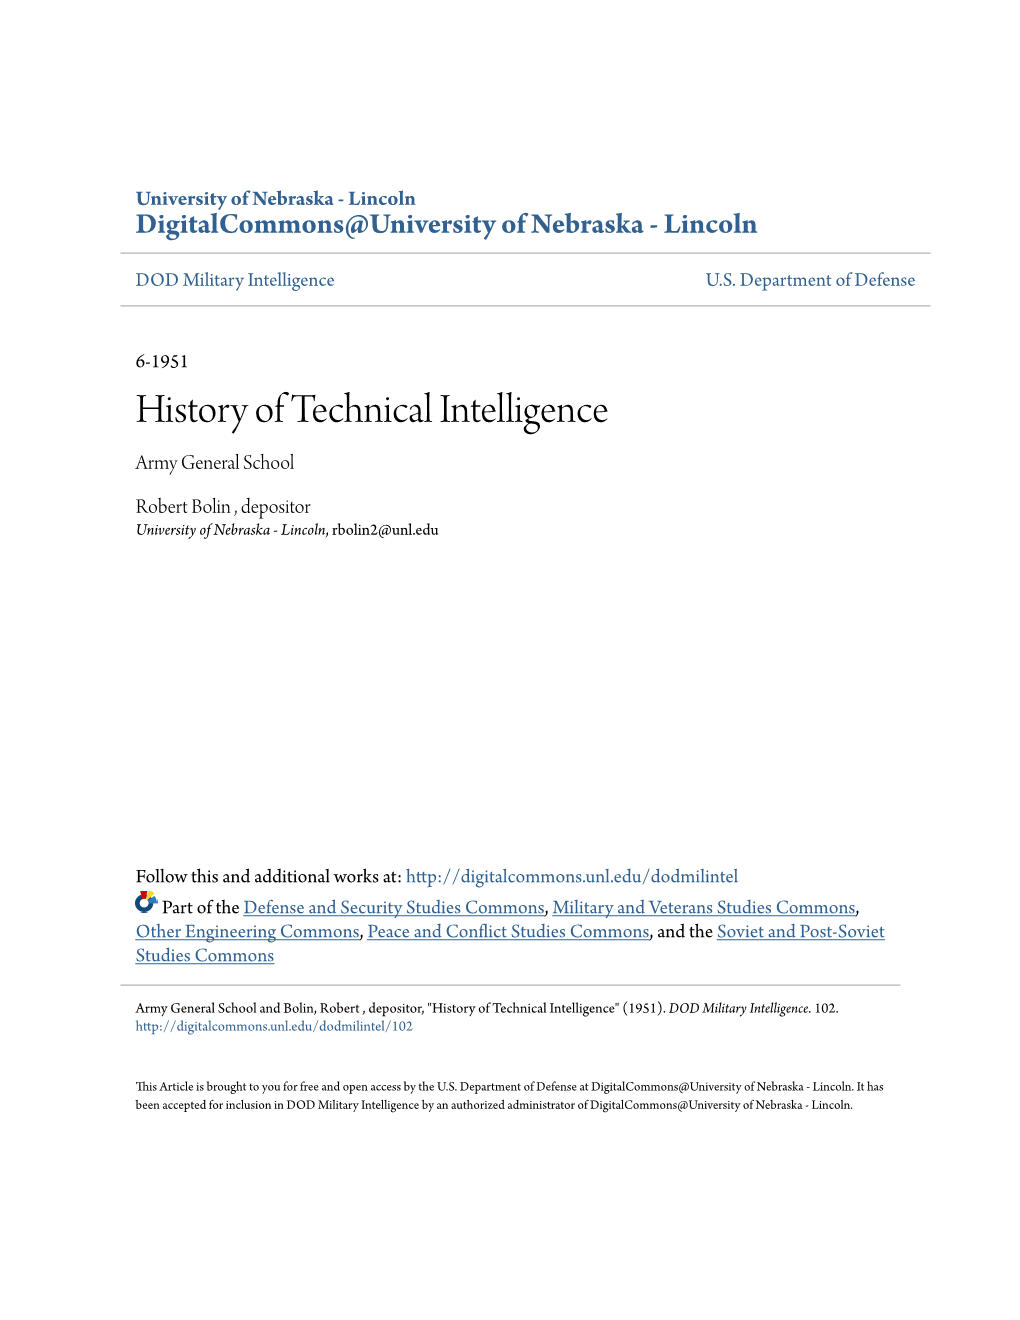 History of Technical Intelligence Army General School